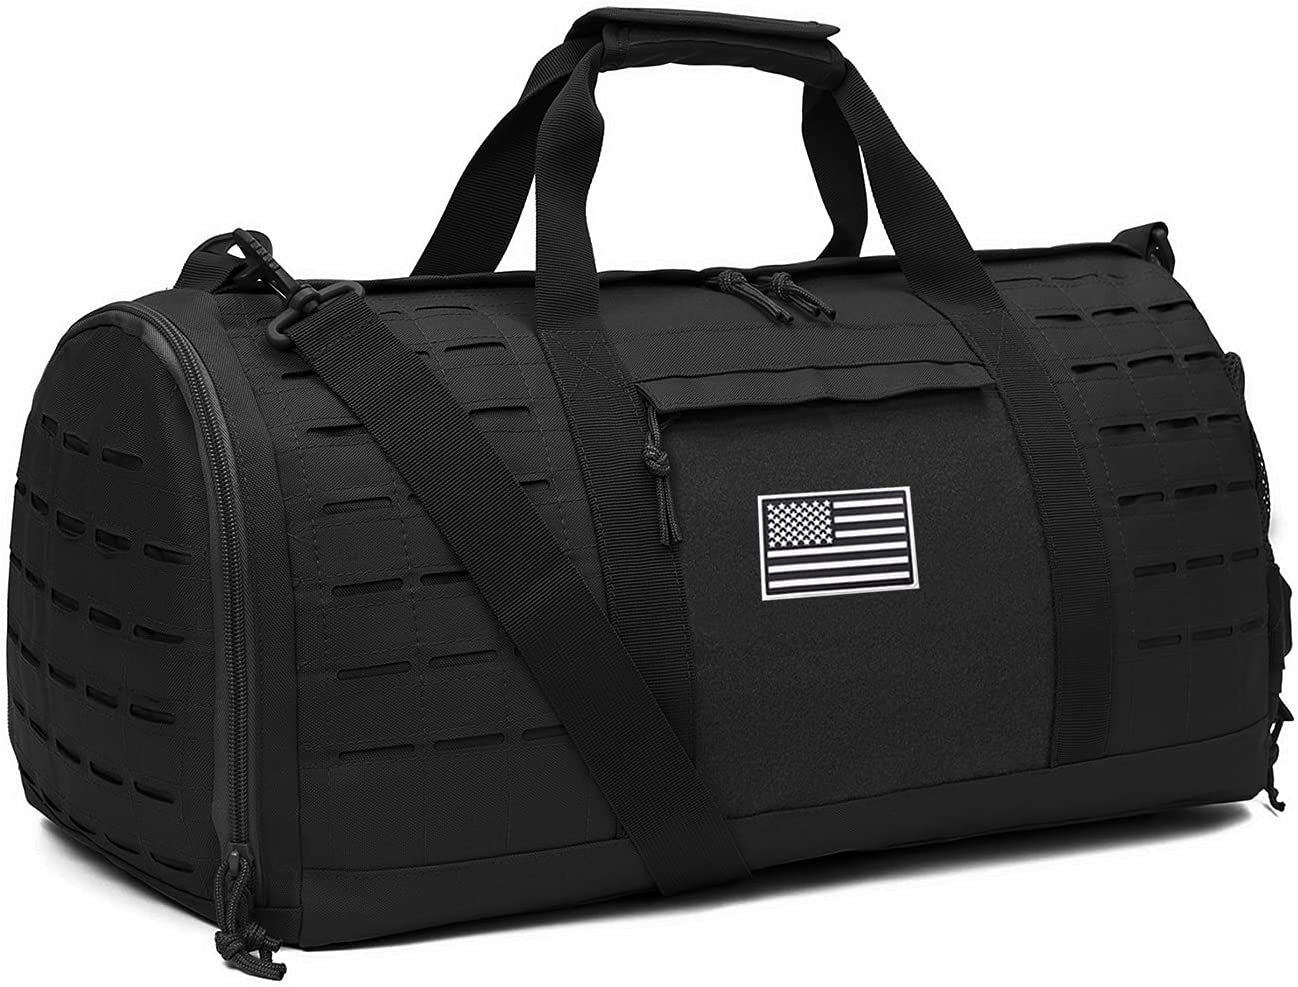 40L Military Tactical Duffle Bag For Men Sport Gym Bag Fitness Tote Travel Duffle Bag Training Workout Bag With Shoe Compartment Basketball Football Weekender Bag